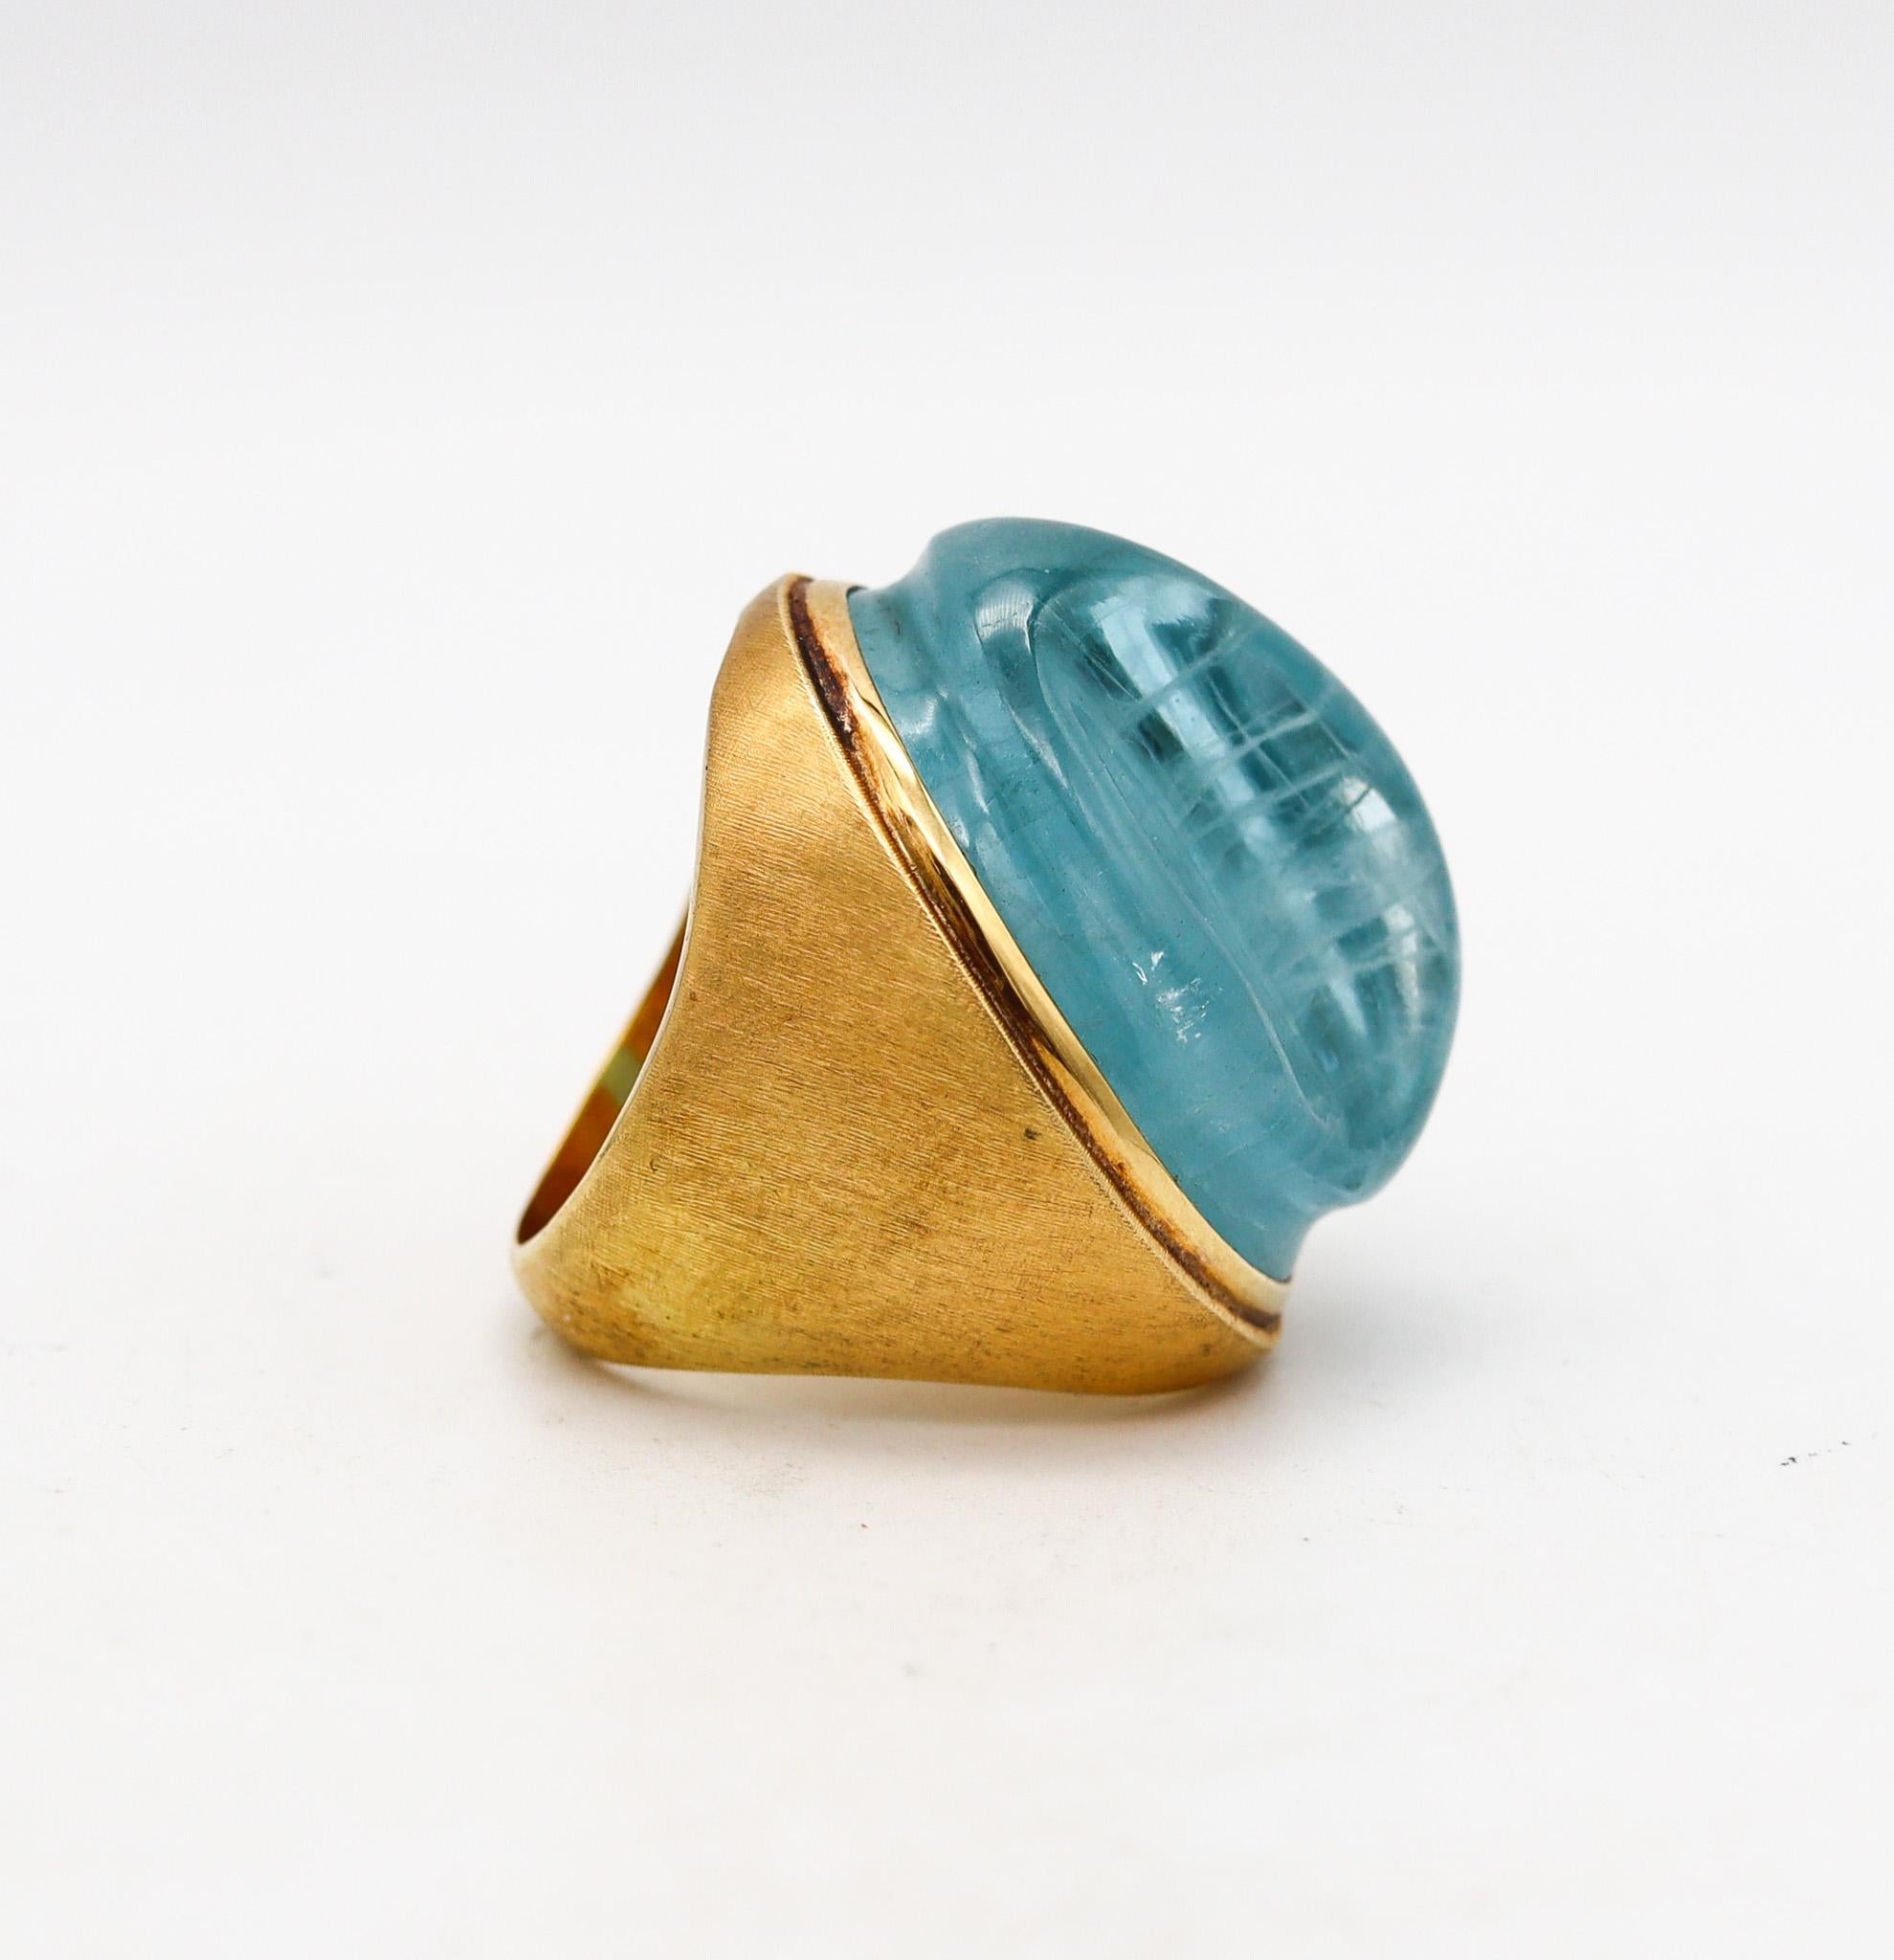 Modernist Burle Marx Bruno Guidi 1970 Cocktail Ring 18Kt Yellow Gold and 35Cts Aquamarine